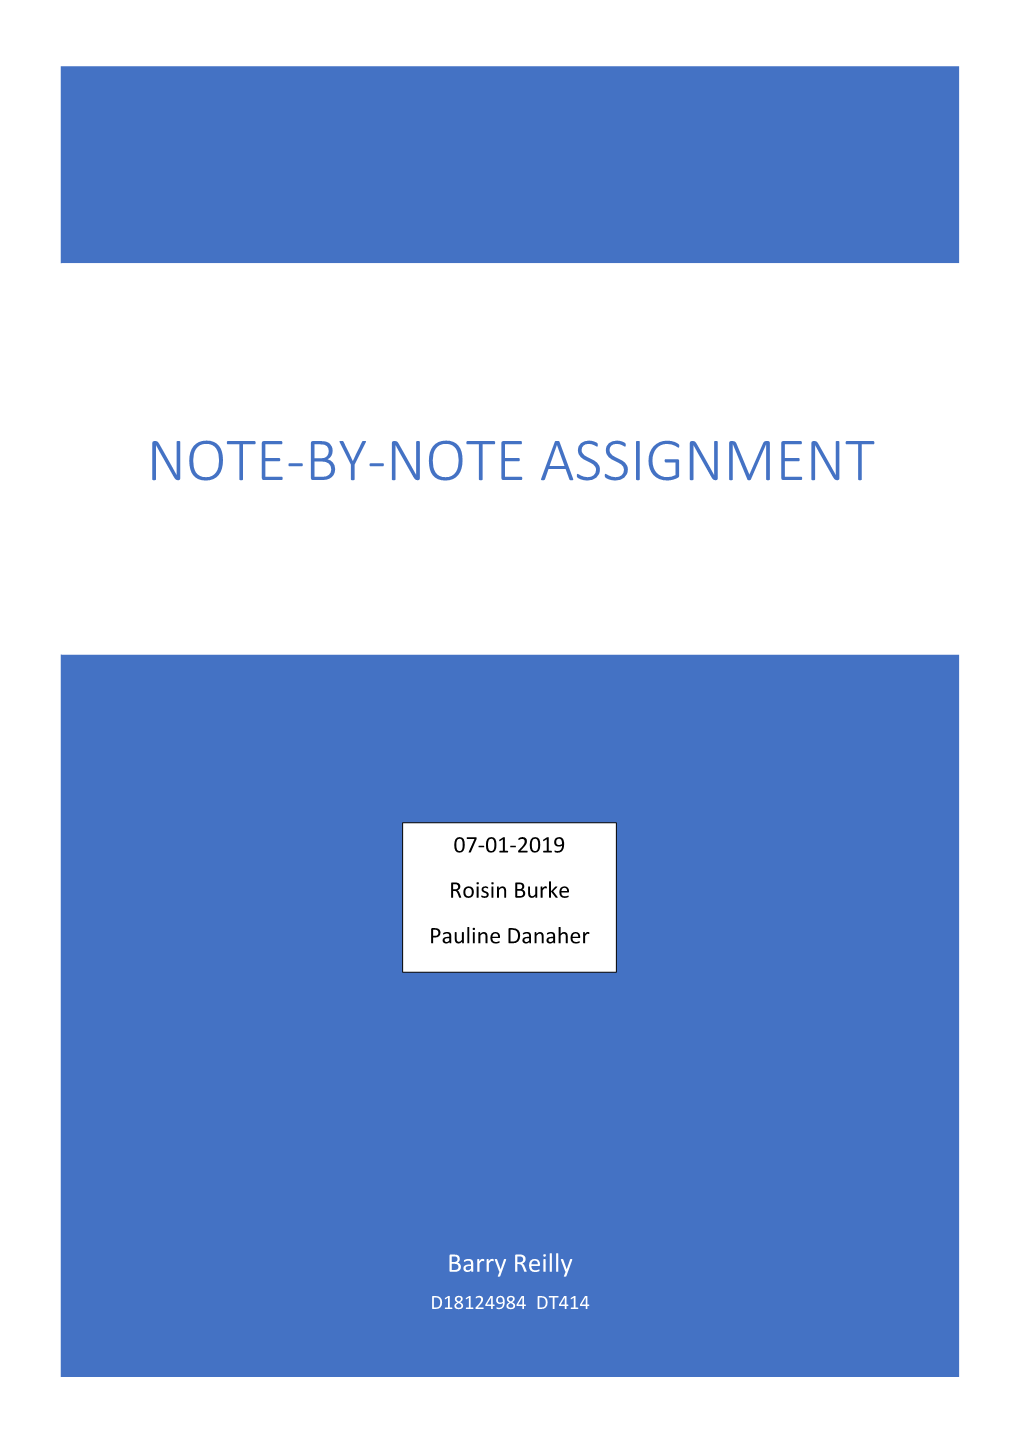 Note-By-Note Assignment